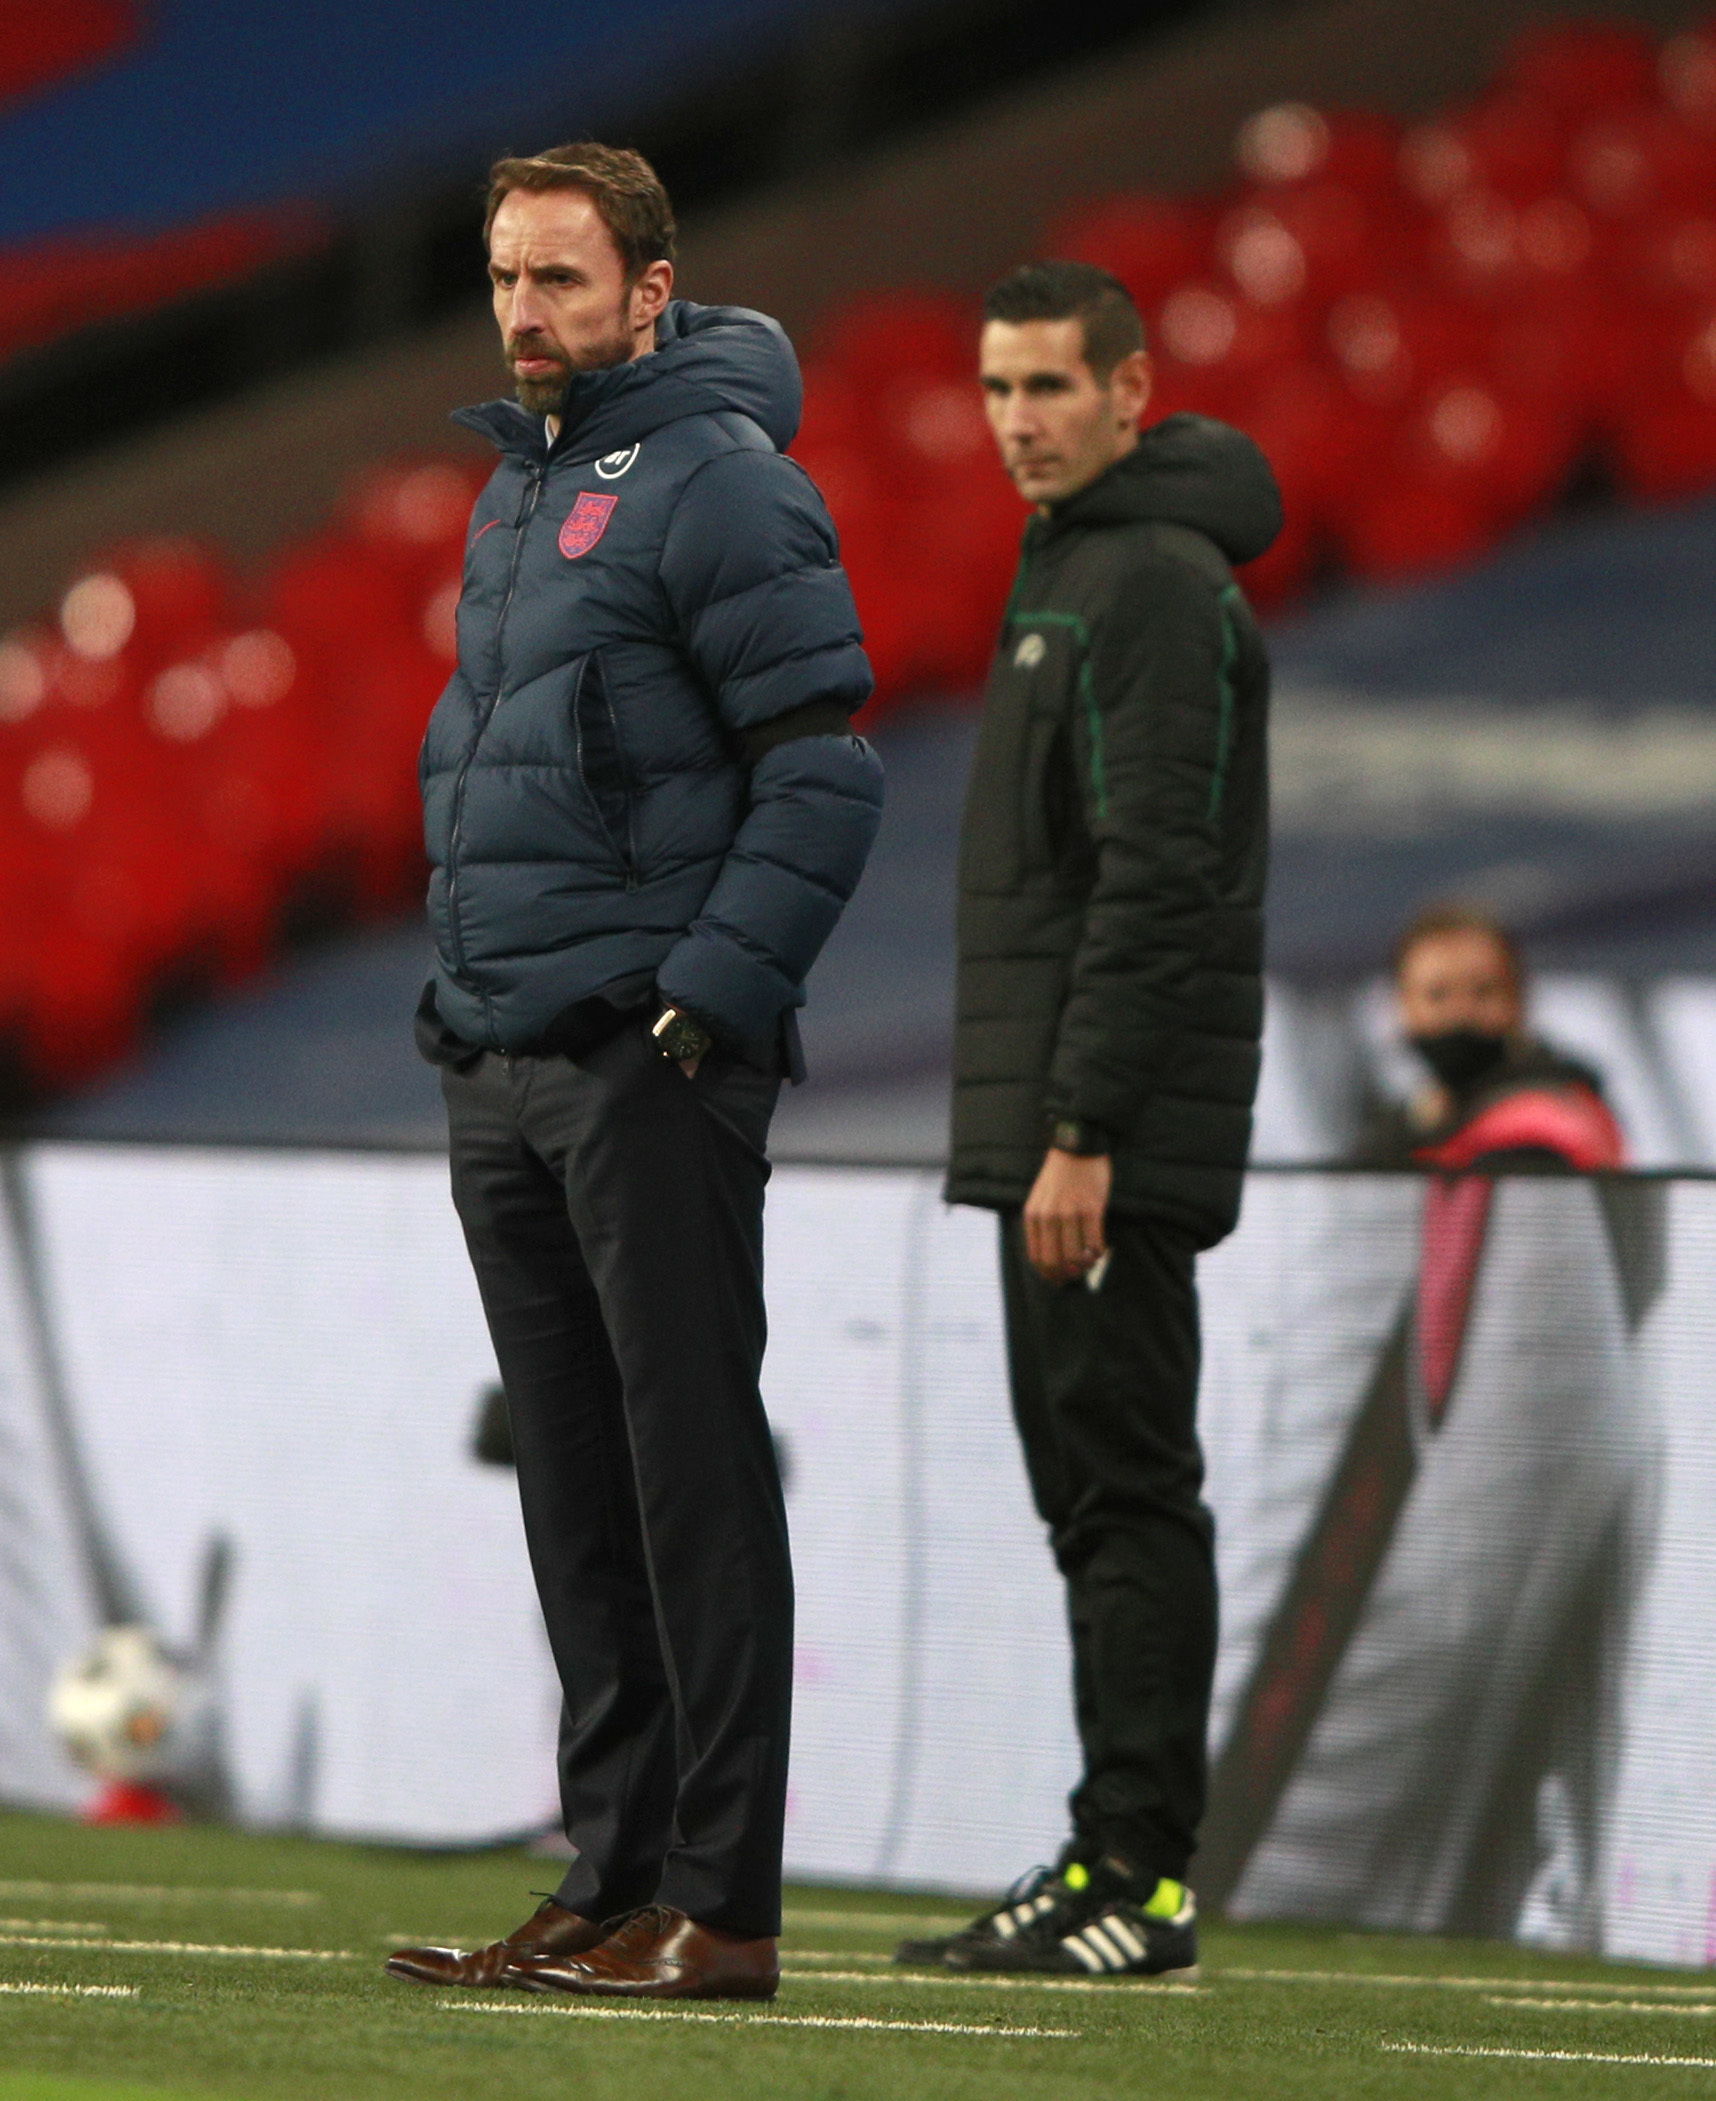 England manager Gareth Southgate (left) on the touchline during the UEFA Nations League Group A2 match at Wembley Stadium, London. PA Photo. Picture date: Wednesday November 18, 2020. See PA story SOCCER England. Photo credit should read: Ian Walton/PA Wi